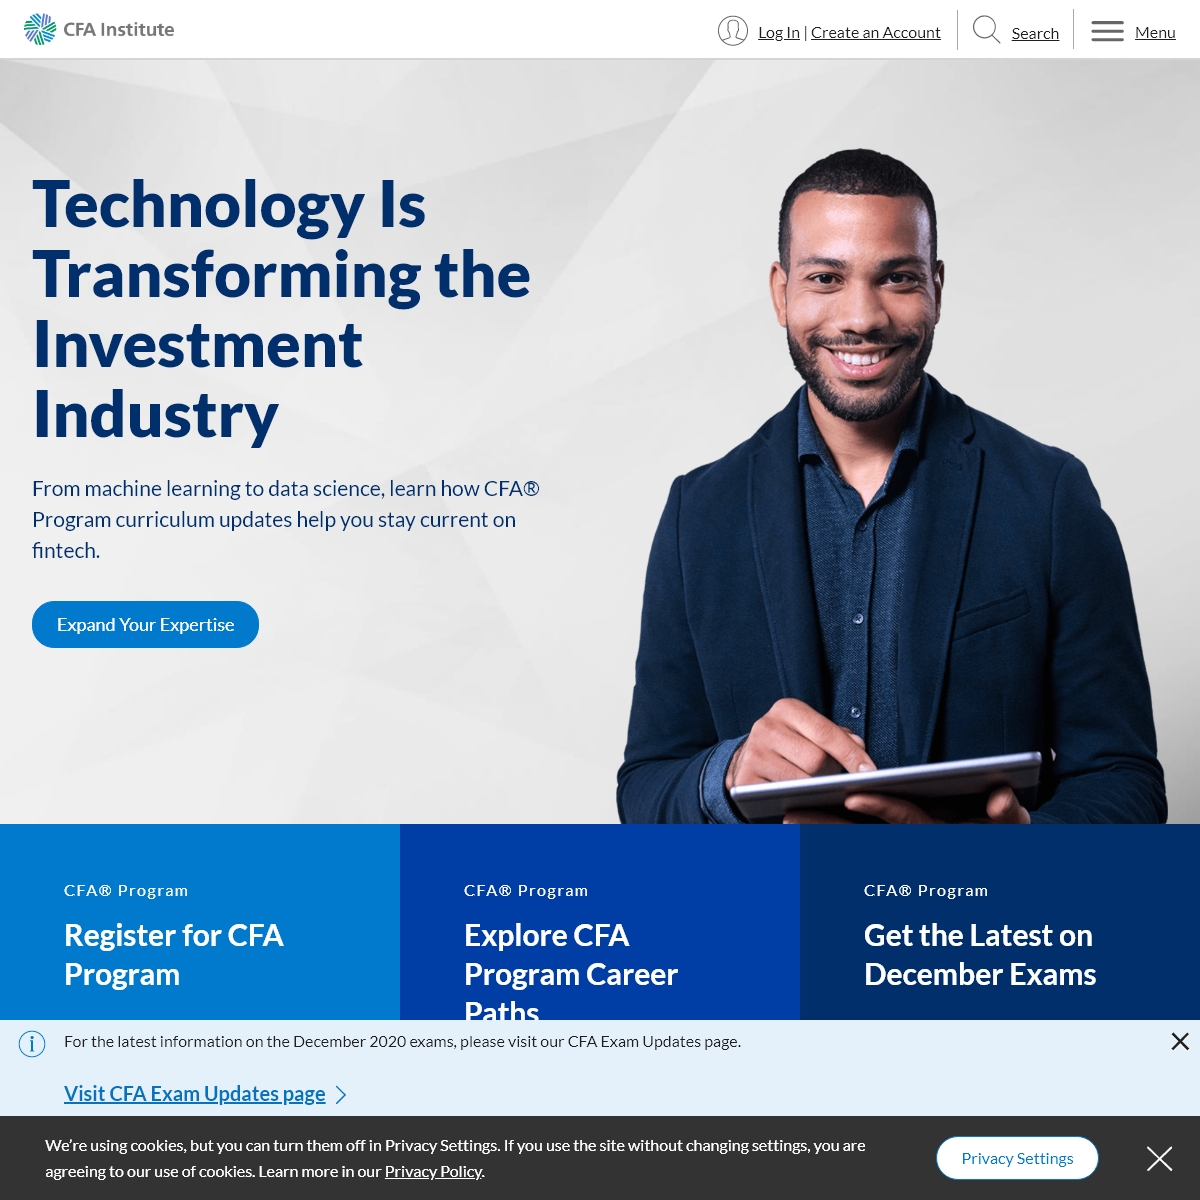 A complete backup of cfainstitute.org